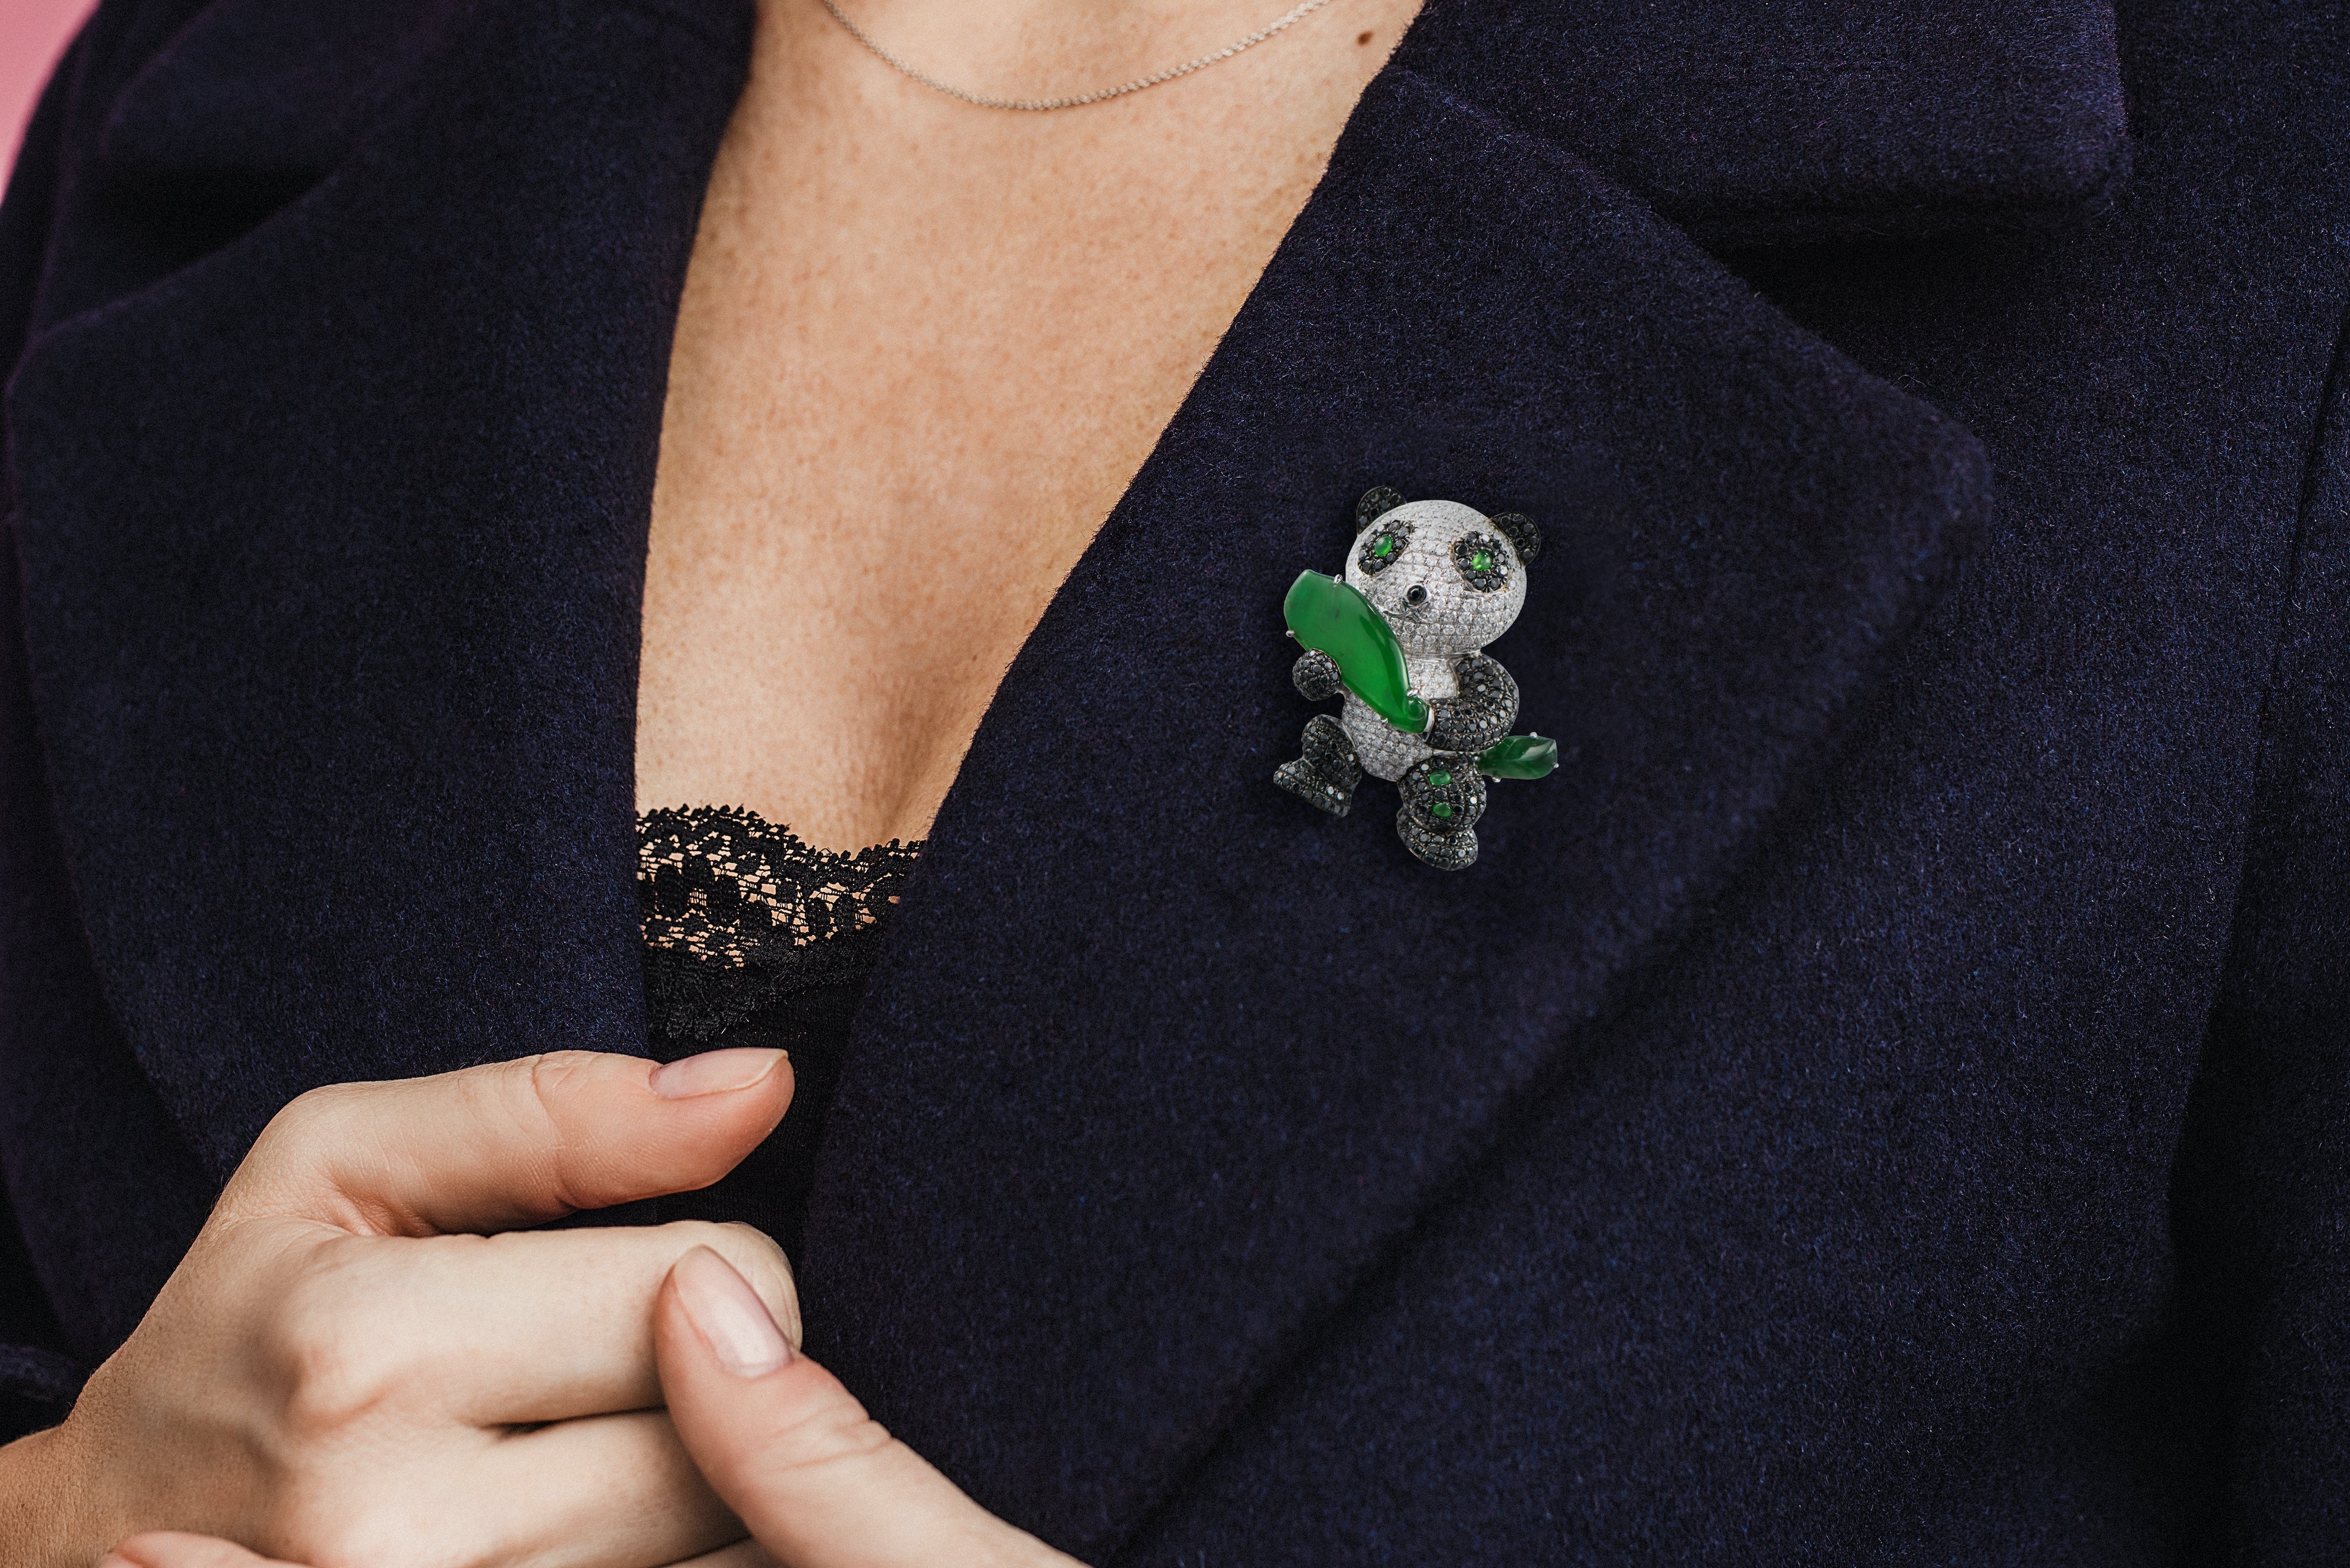 How To Wear a Brooch Creatively In 2022 - Jade Artisan